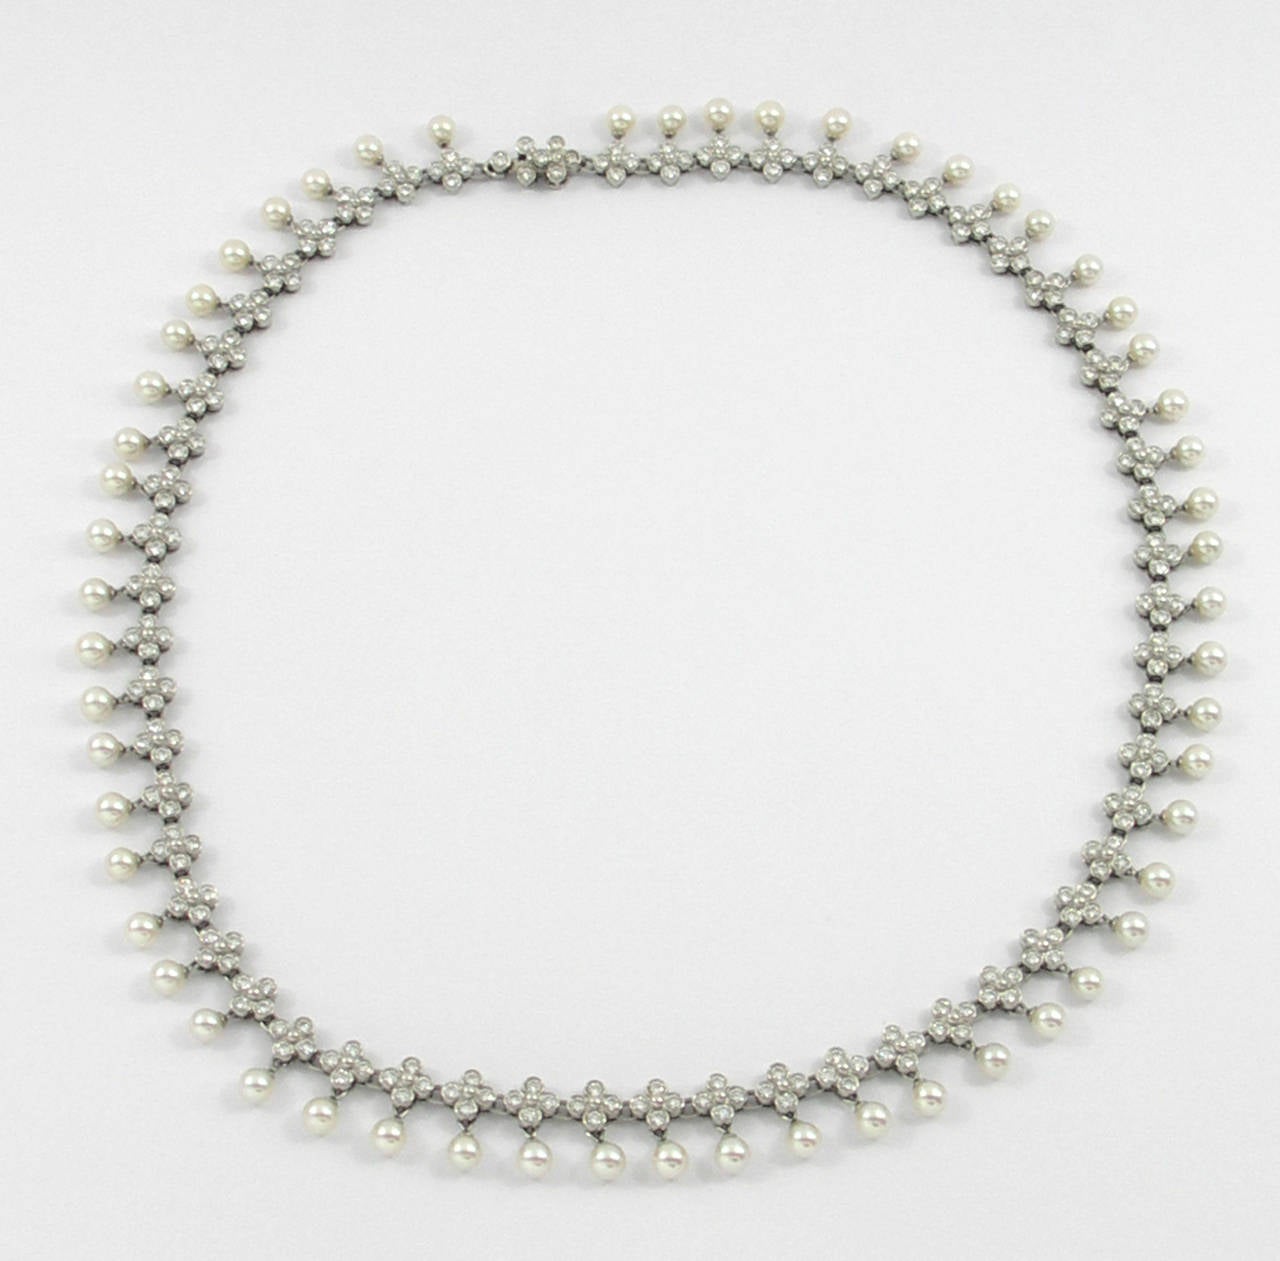 A ladies necklace by Tiffany & Company, comprised of platinum, diamonds, and pearls. Measuring 3/8 of an inch wide, each link is comprised of a clover of four round brilliant cut diamonds, and a 4mm round cultured pearl. Diamonds weigh 5ct total